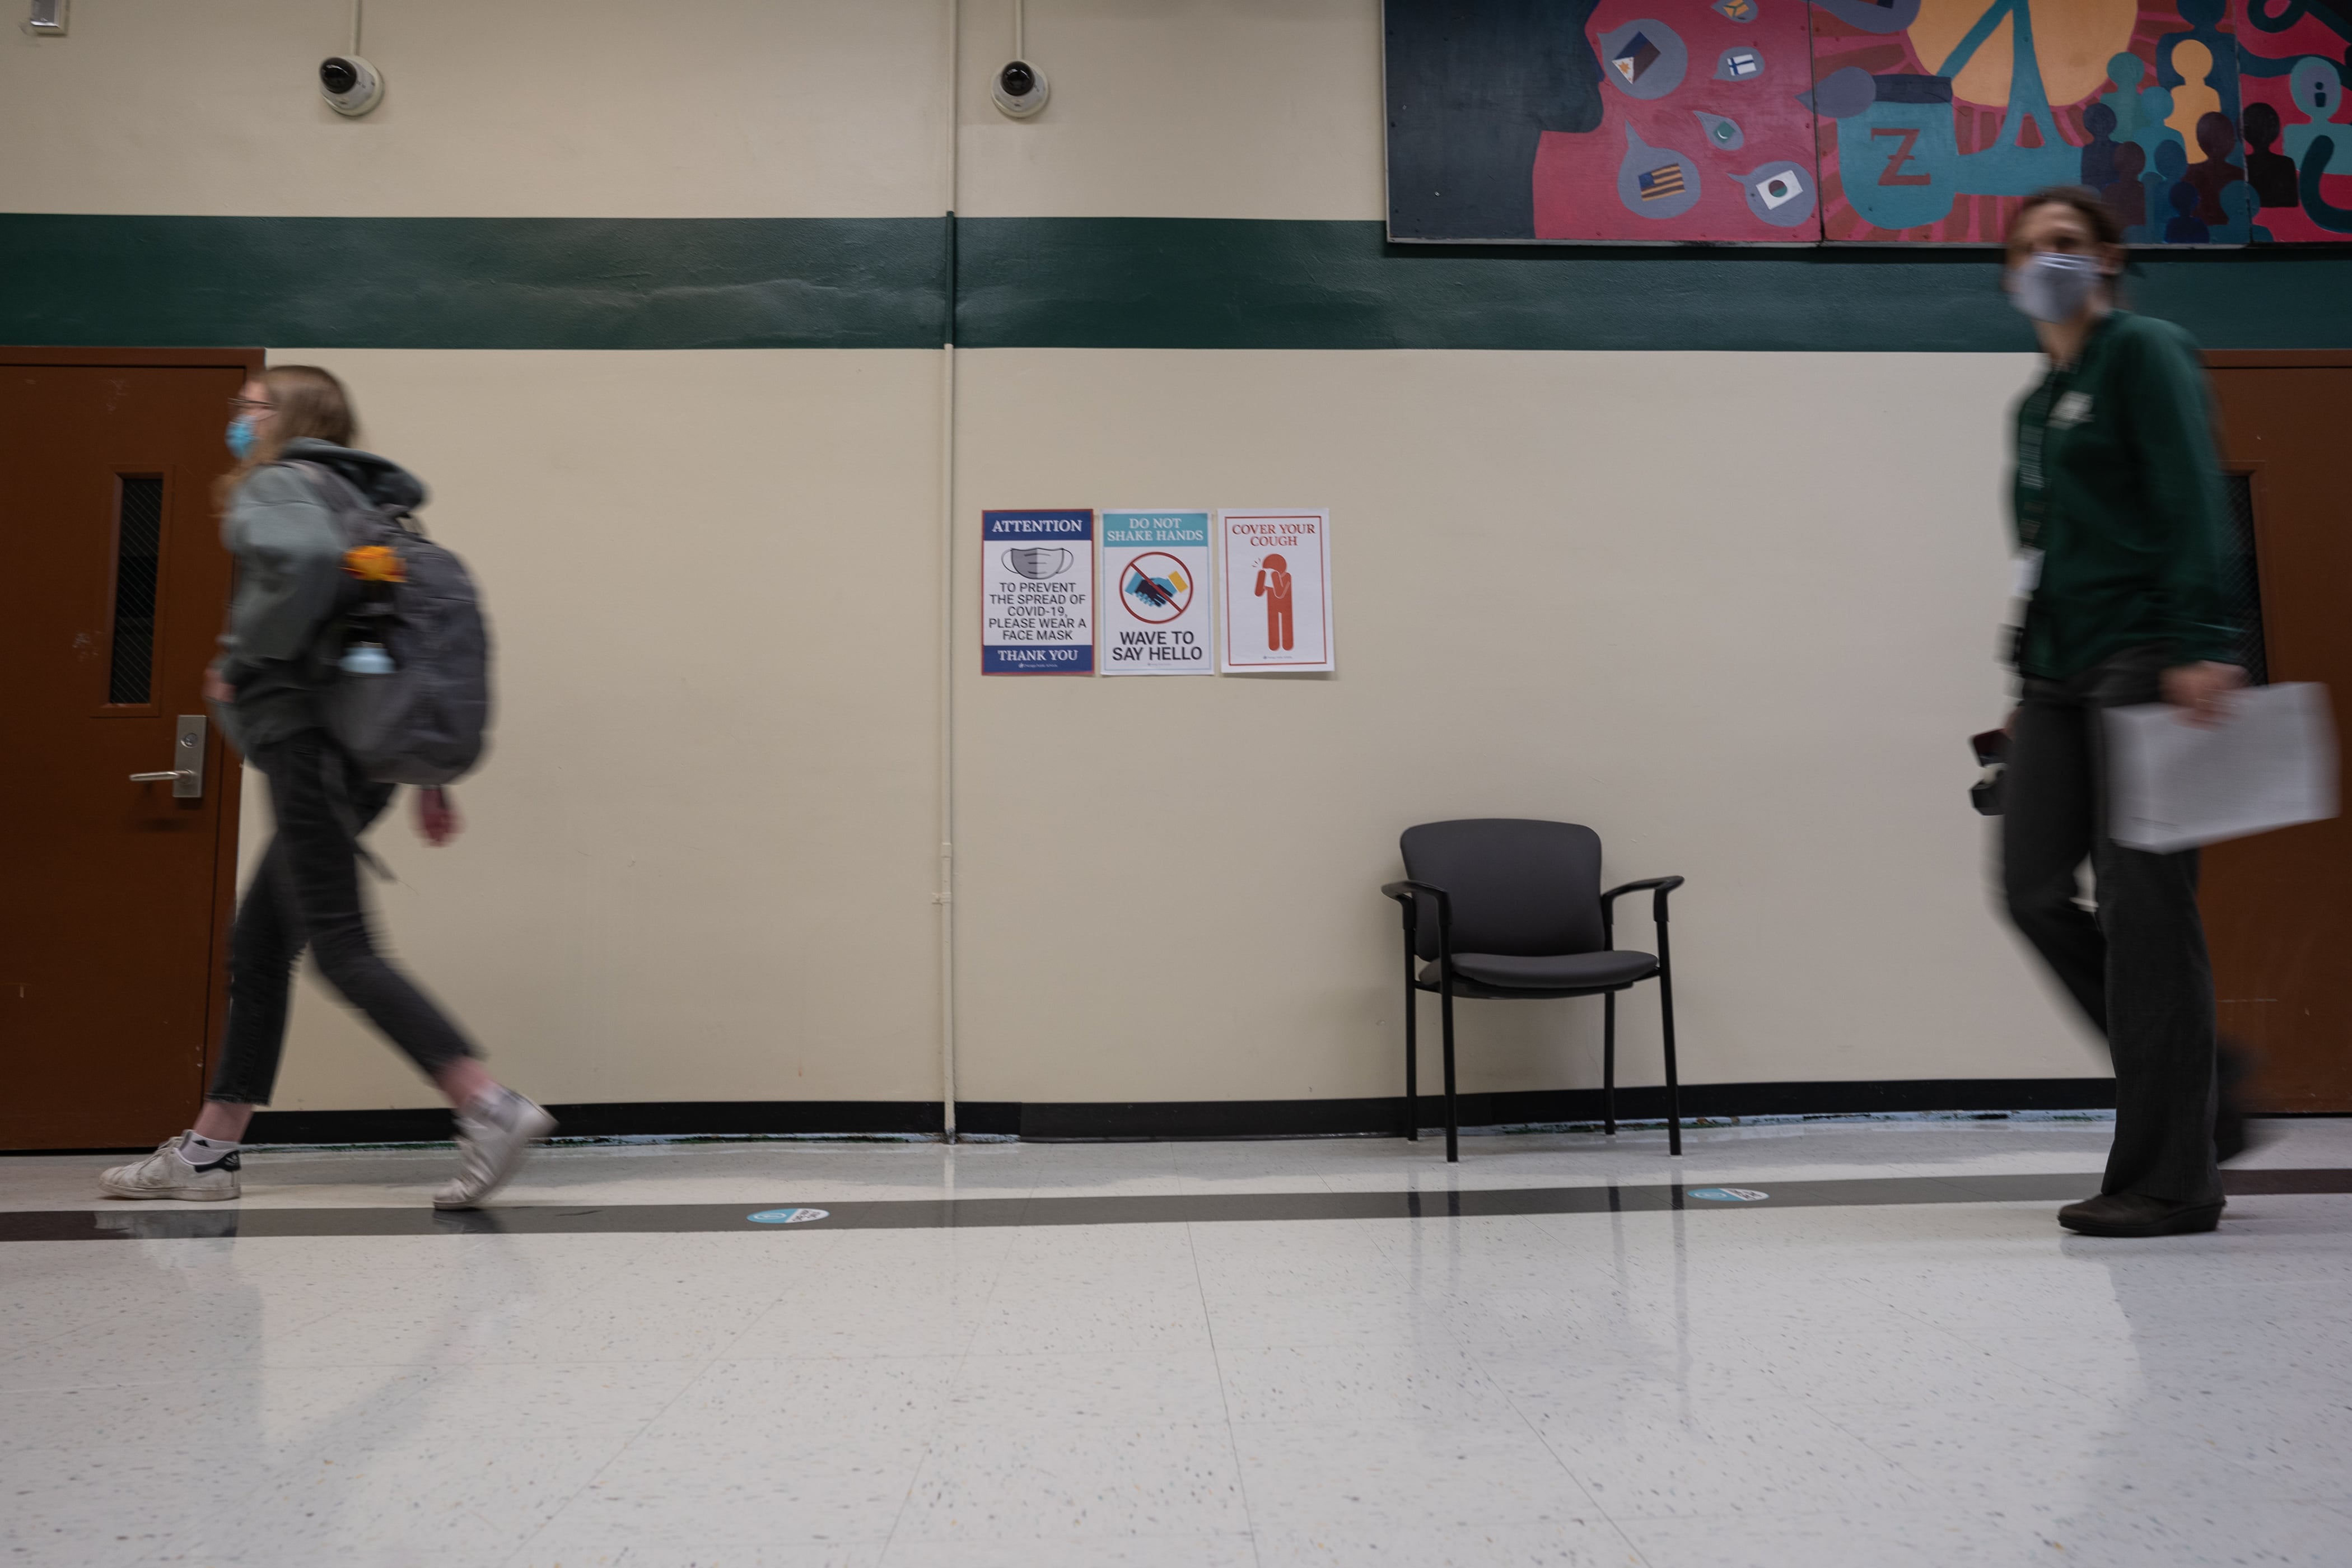 Students and staff walk the halls of Senn High School, past a poster showing COVID-19 safety guidelines, on the first week back to classrooms on April 23, 2021.